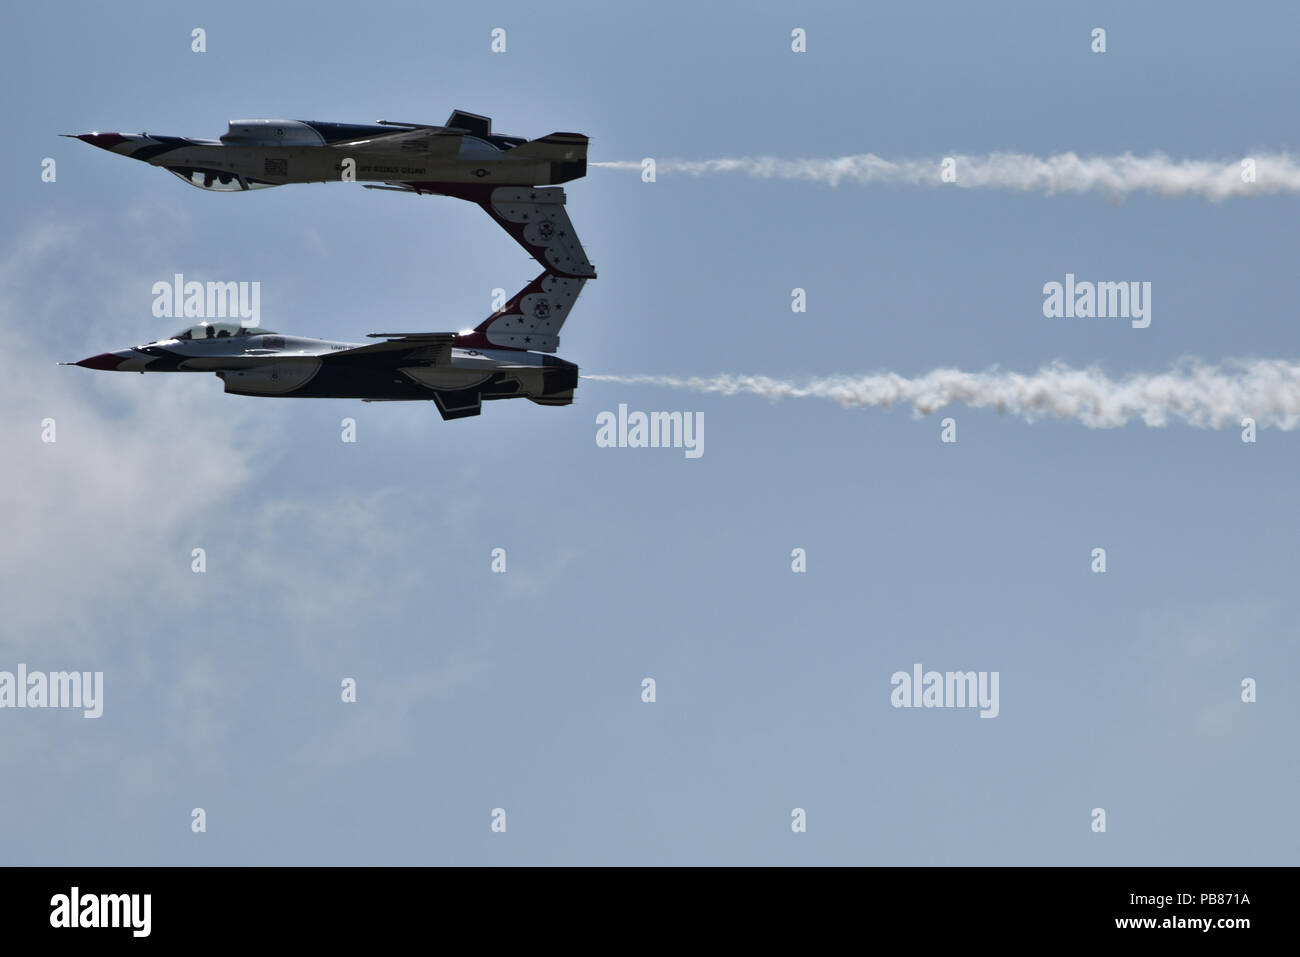 U.S. Air Force Thunderbirds perform a reflection pass during Cheyenne Frontier Days, July 25, 2018, in Cheyenne, Wyo. The Thunderbirds fly closely in formation and make close passes at intense speeds during their shows showcasing their skills as an aerial acrobatics team. The airshow provides a chance for the local community and worldwide visitors of CFD to see the U.S. Air Force in action over the skies of Cheyenne. (U.S. Air Force photo by Airman 1st Class Braydon Williams) Stock Photo